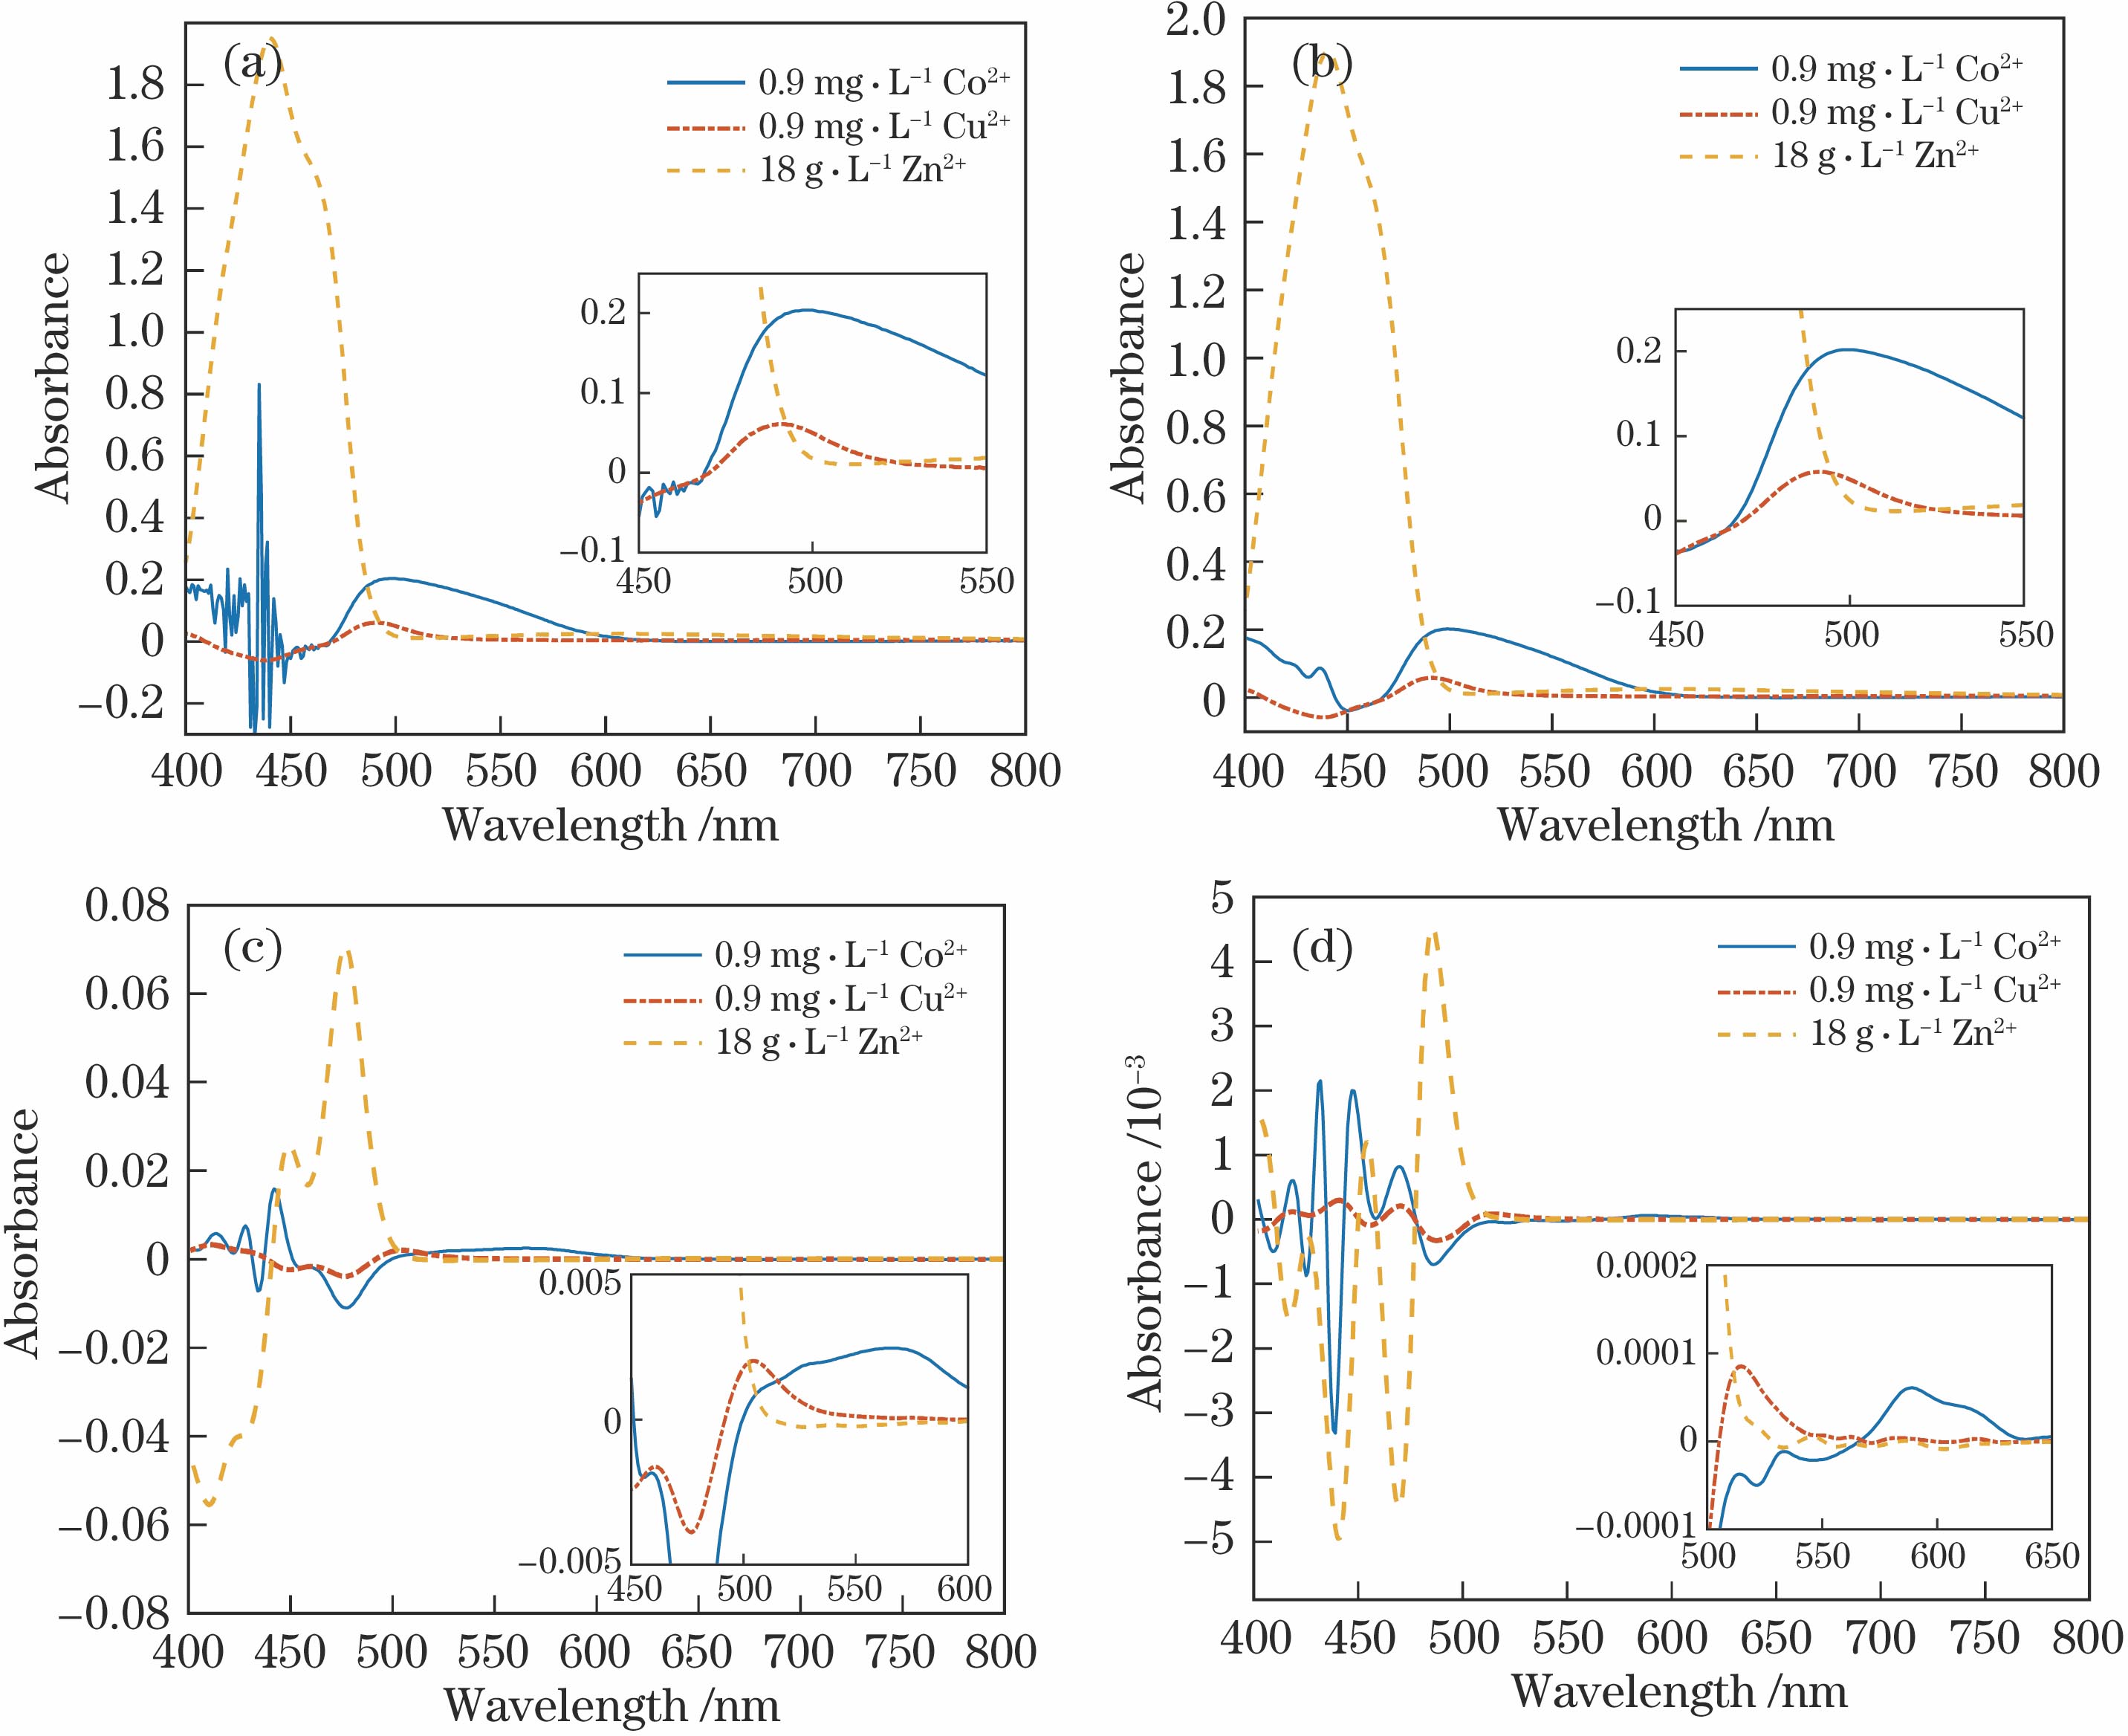 Spectral signals with different orders. (a) Original spectral signals; (b) original spectral filtering signals; (c) first-order spectral filtering signals; (d) second-order spectral filtering signals